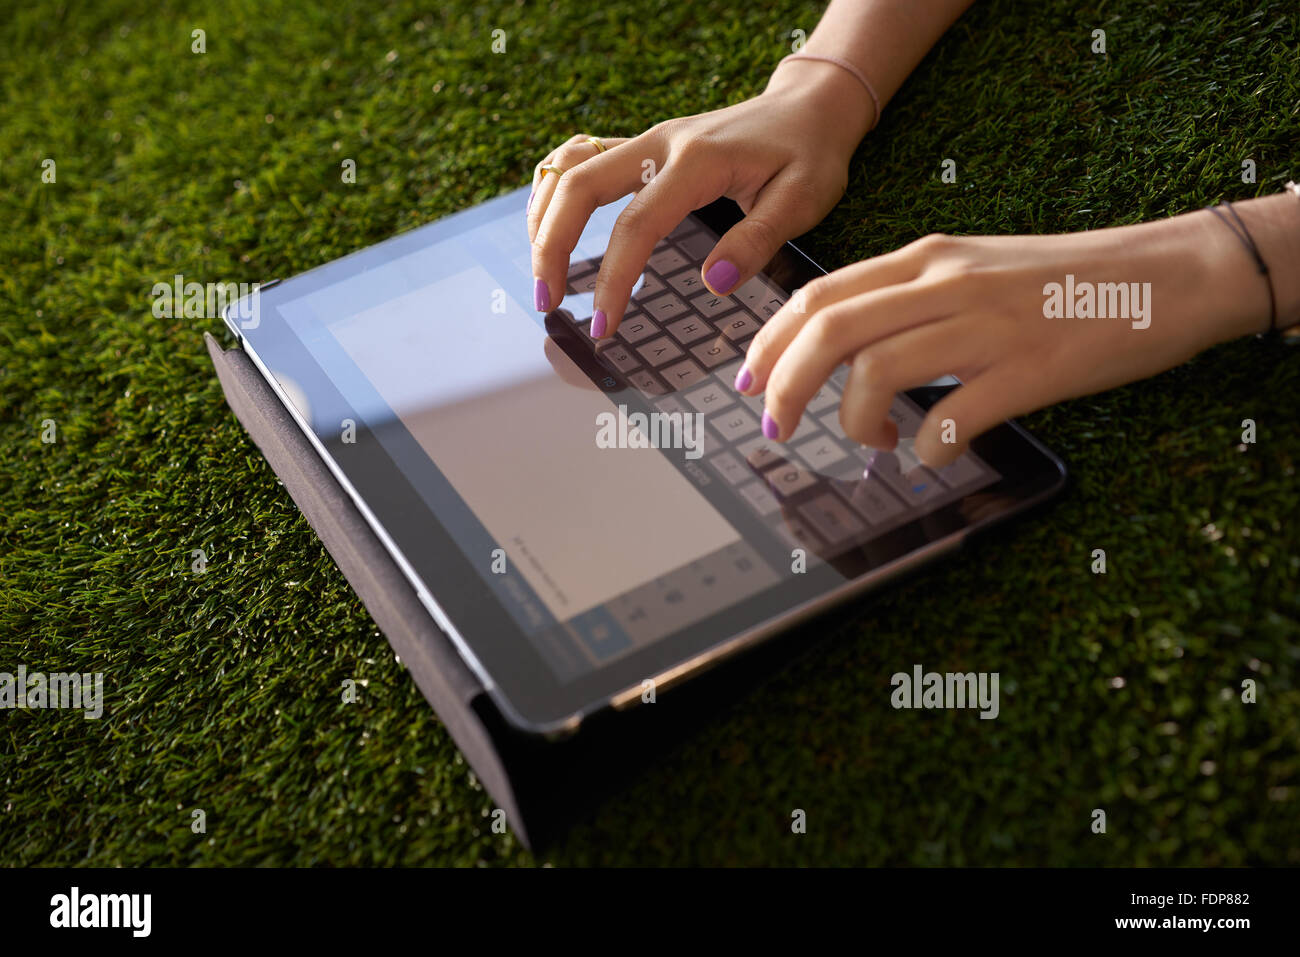 Closeup view of young woman writing on tablet pc on grass, typing an email on digital screen. Stock Photo